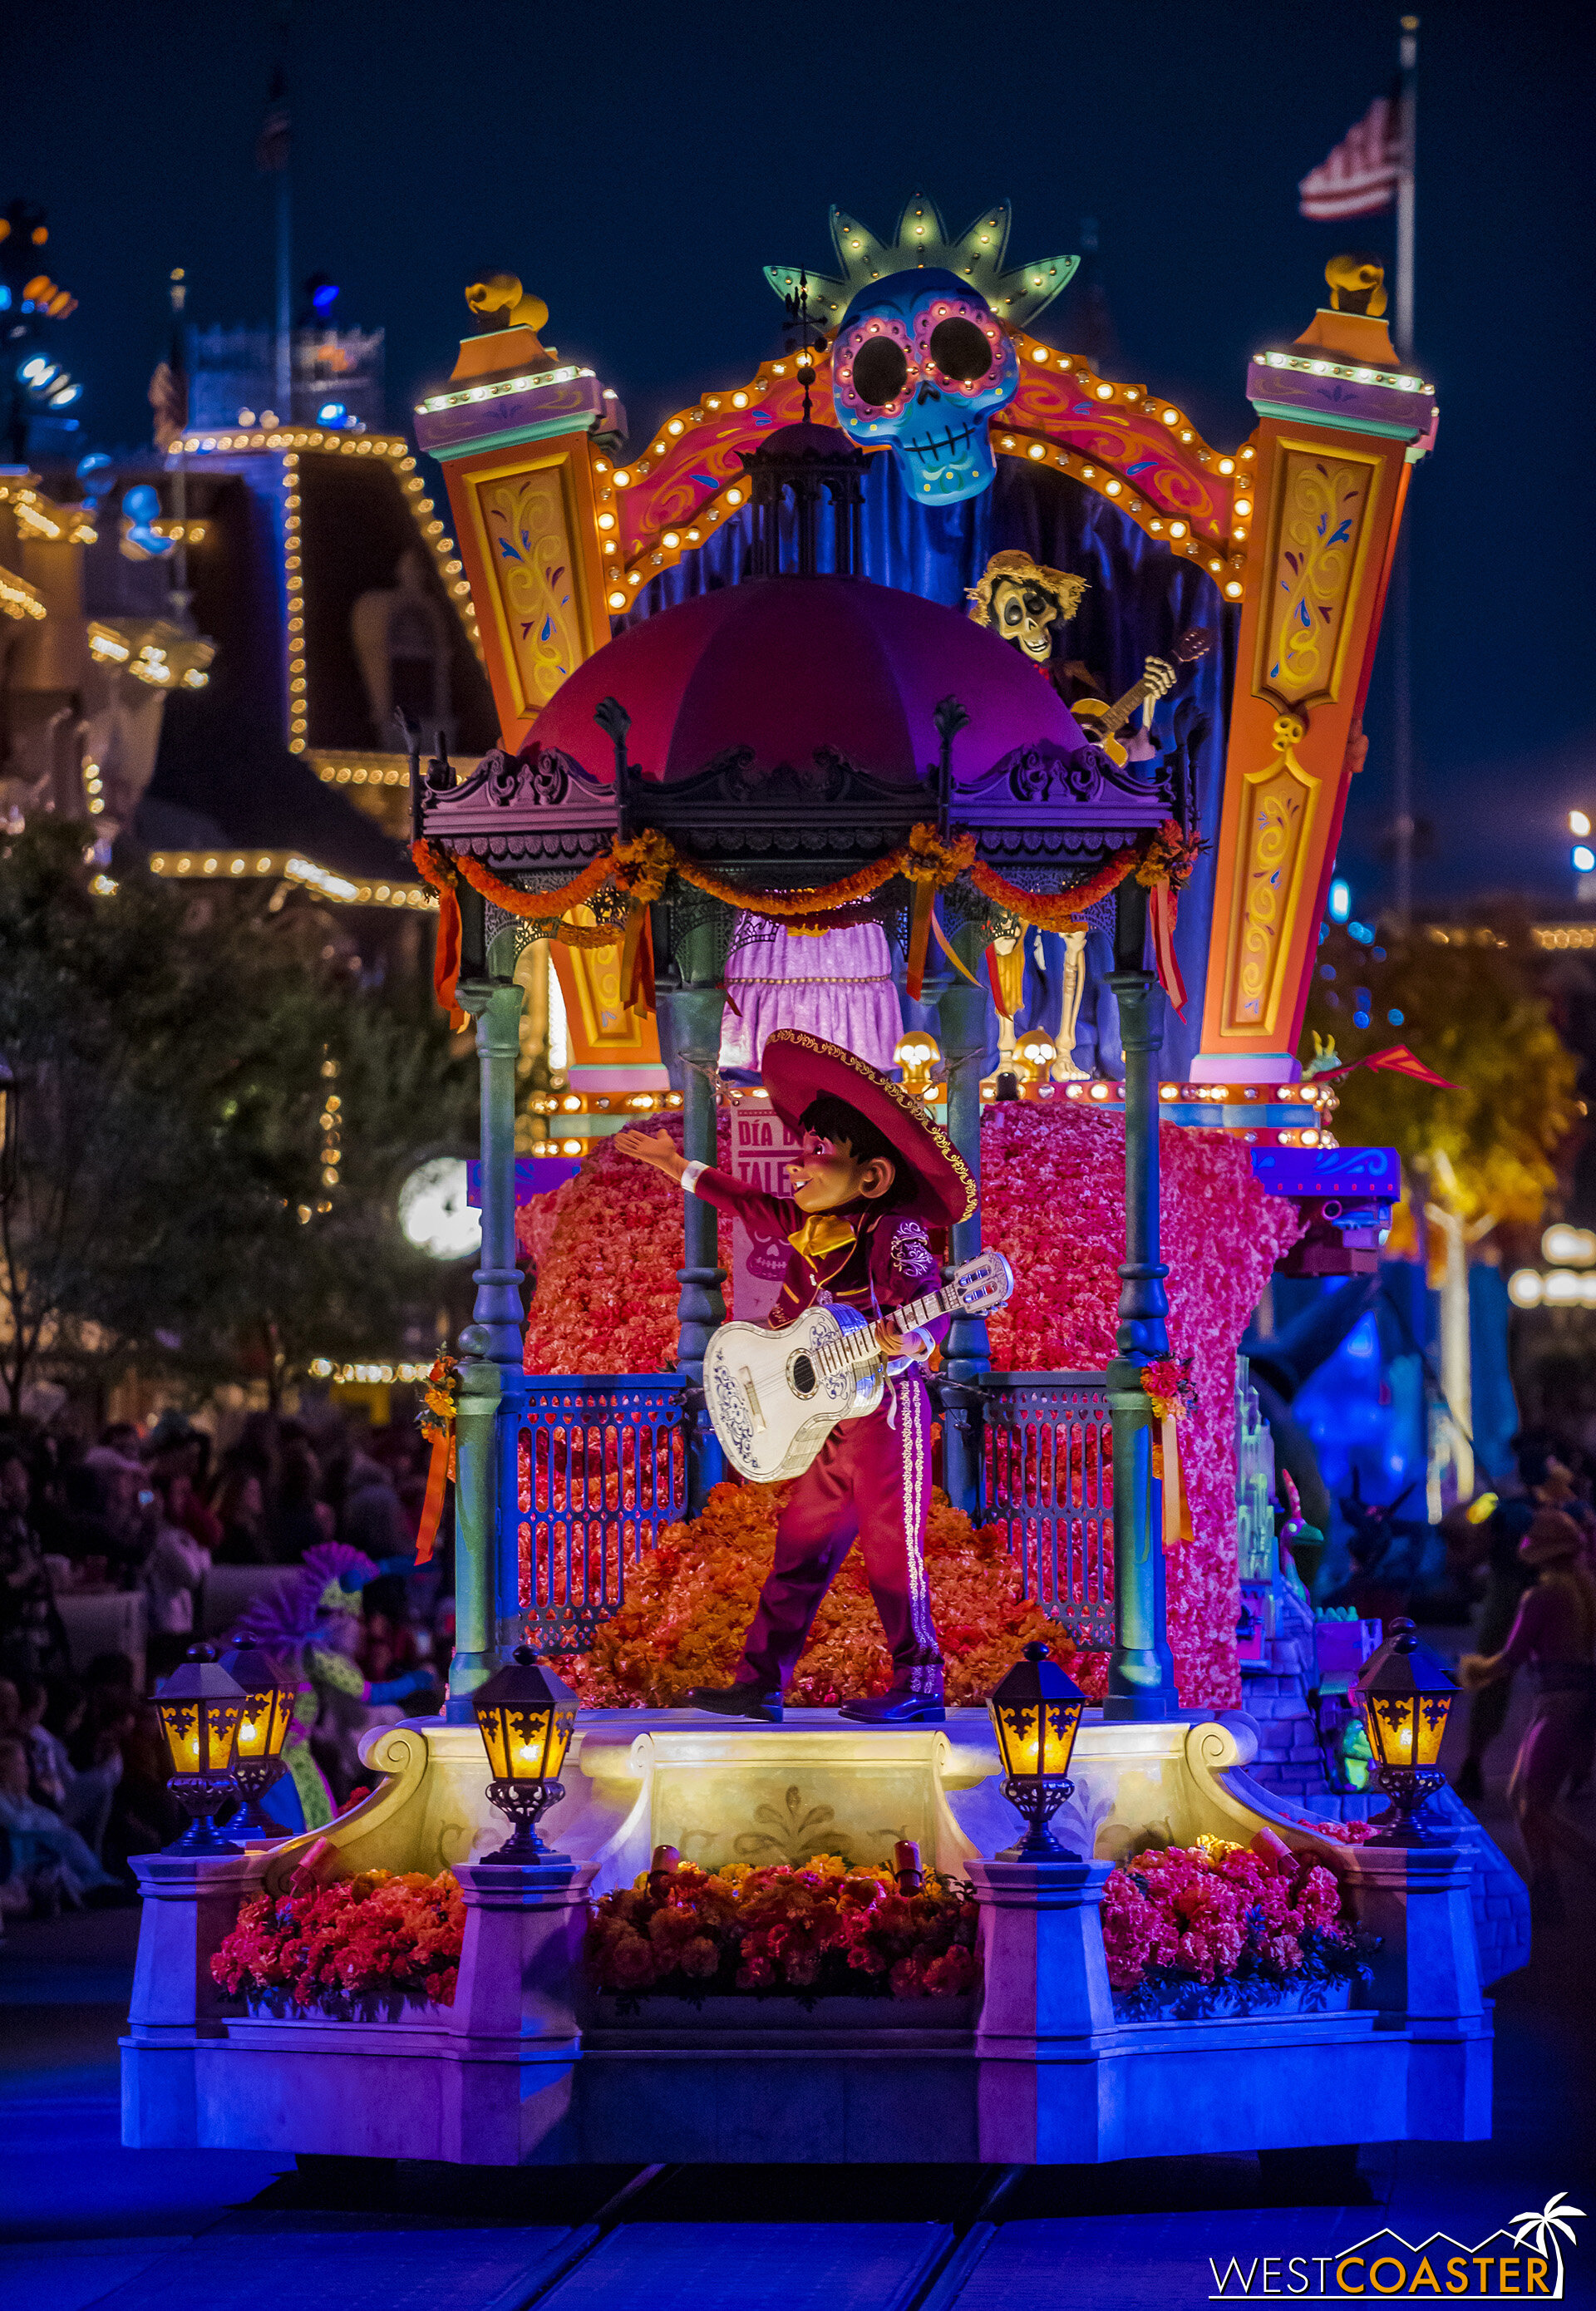  The atmosphere of Día de los Muertos really comes alive (pun not intended) on the Coco float at night! 